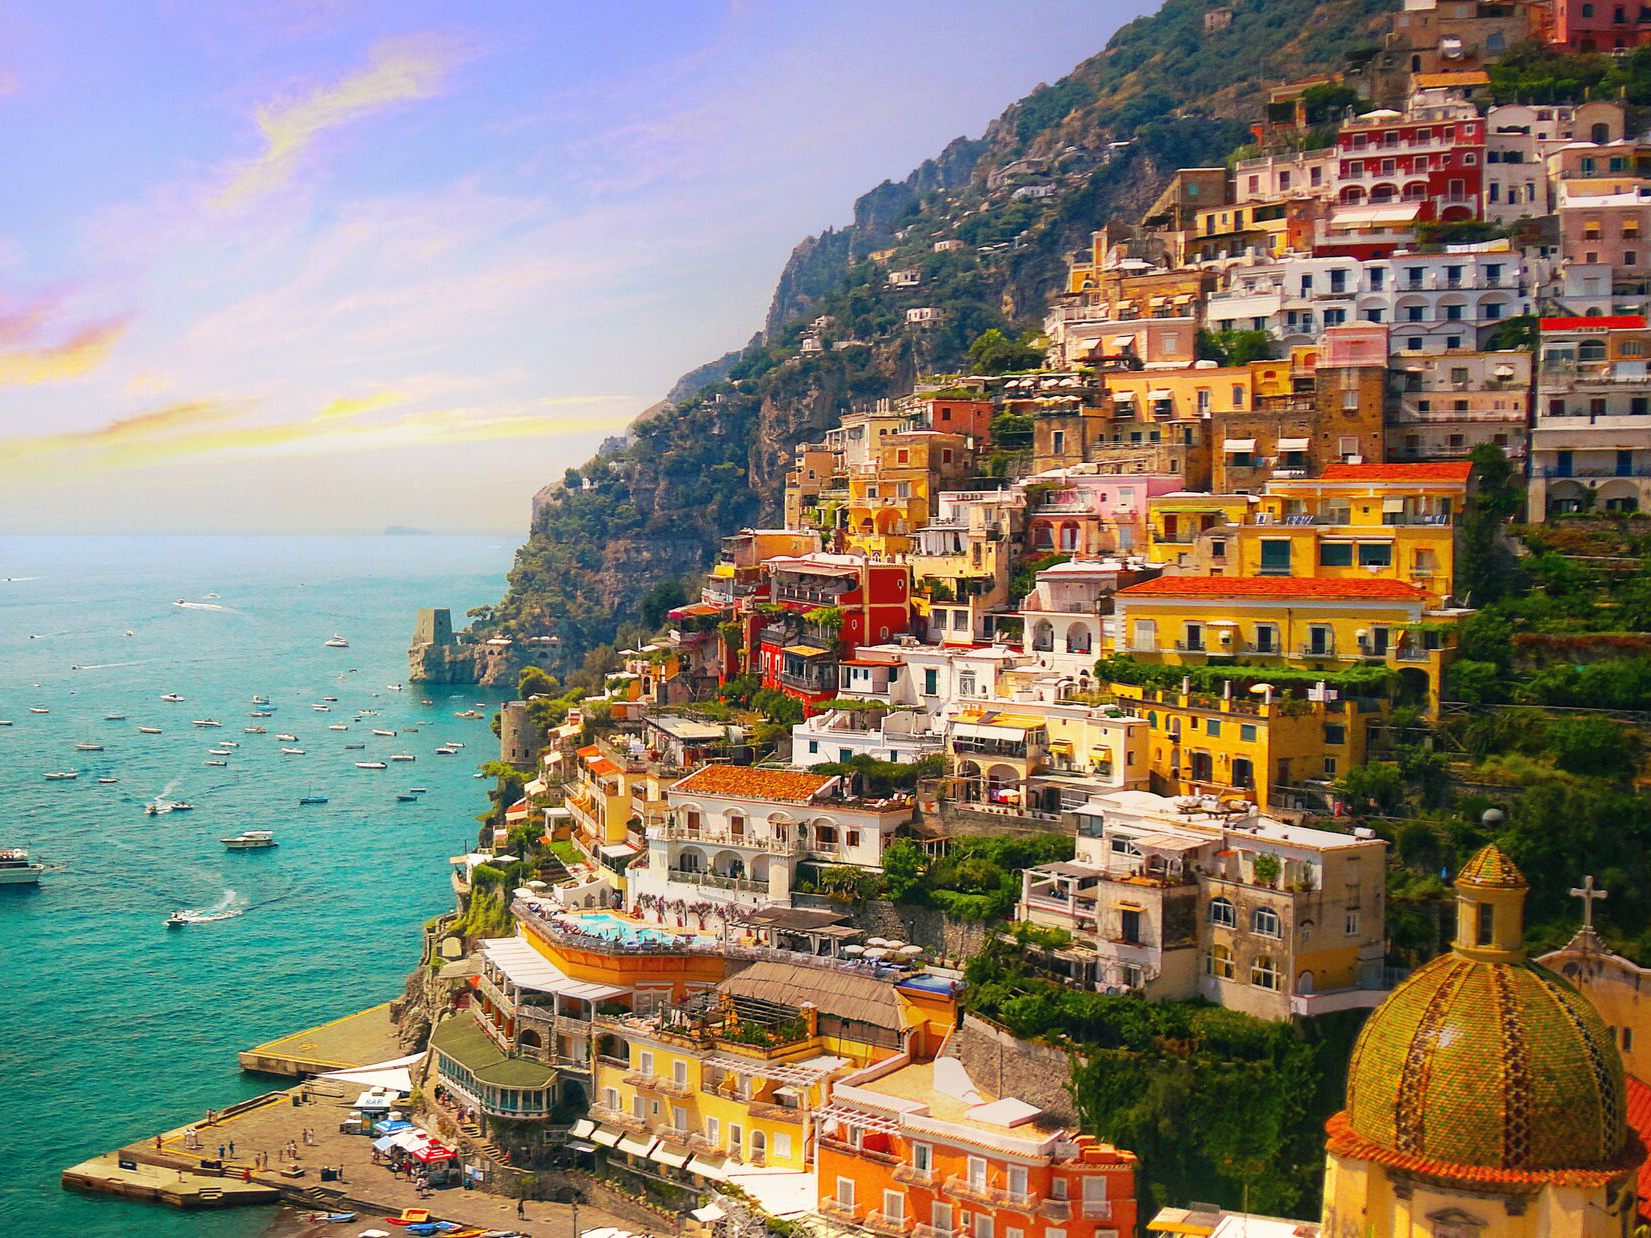 Most Popular Tourist Attractions in Italy - Savor the Scenic Beauty of the Amalfi Coast